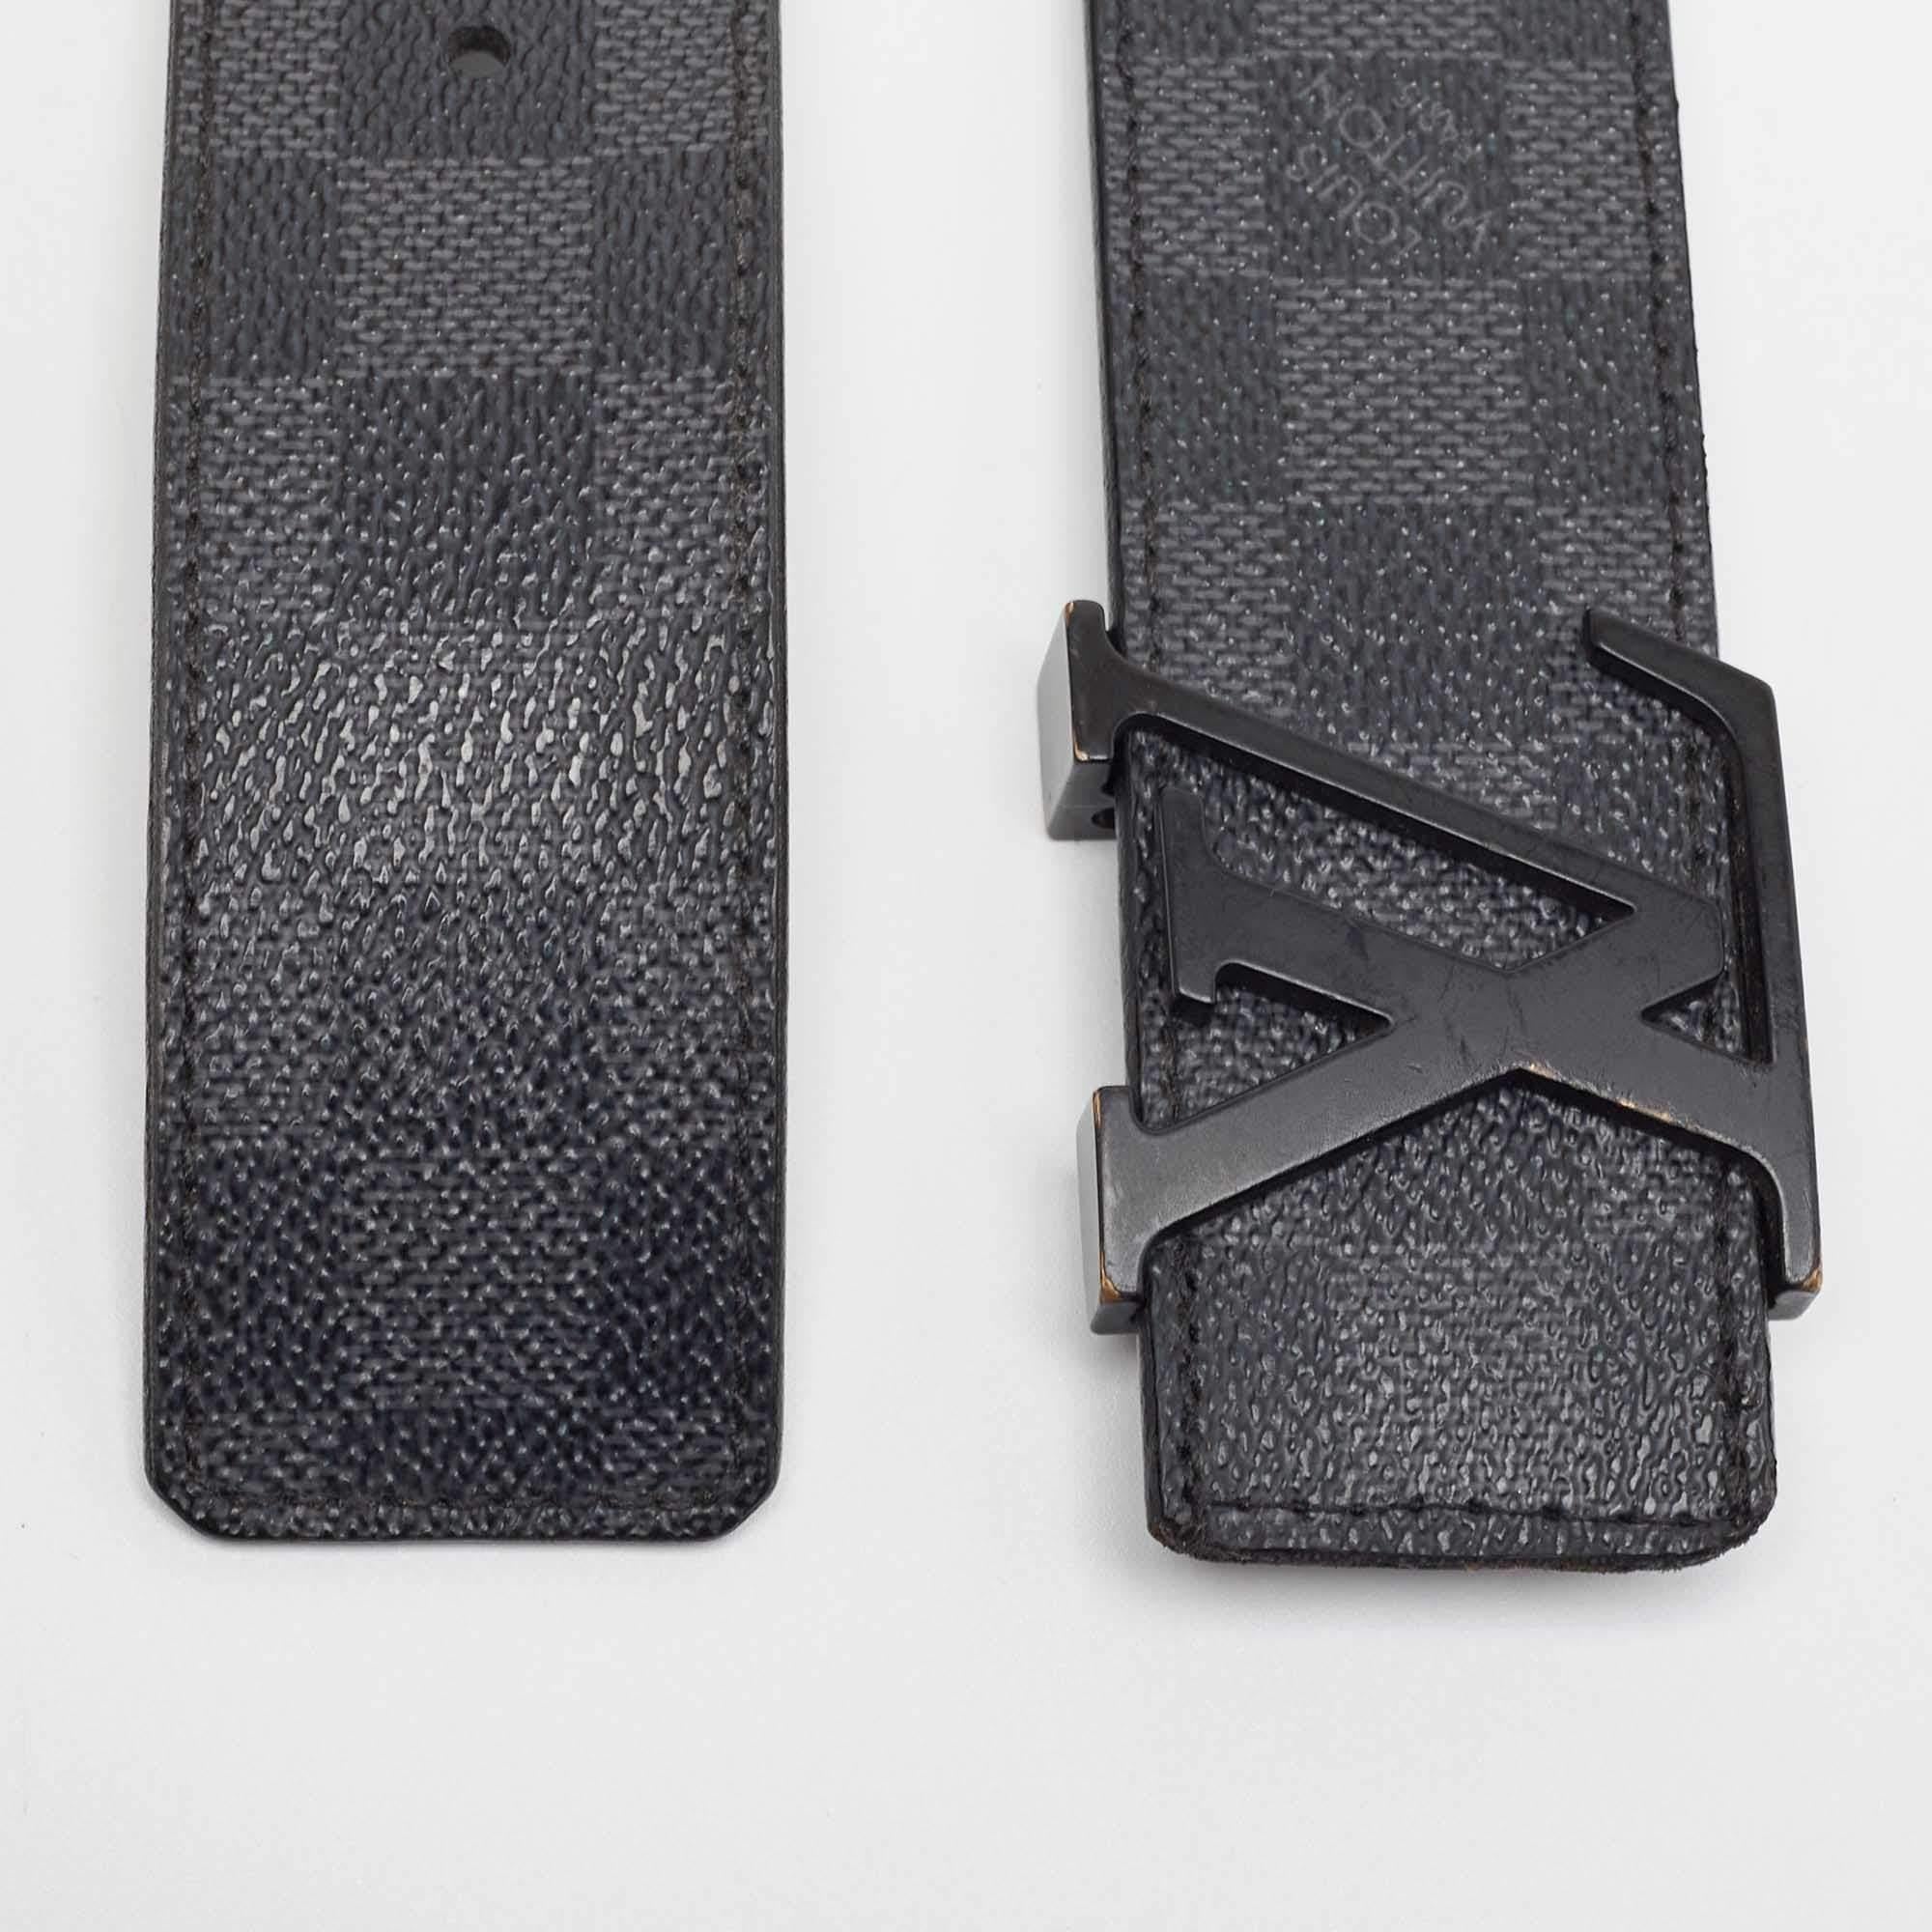 This classy belt from the house of Louis Vuitton will lend you a stylish look when you pair it with your formals. Crafted from the brand's signature Damier Graphite canvas, the must-have creation features the LV initials as the buckle closure. To